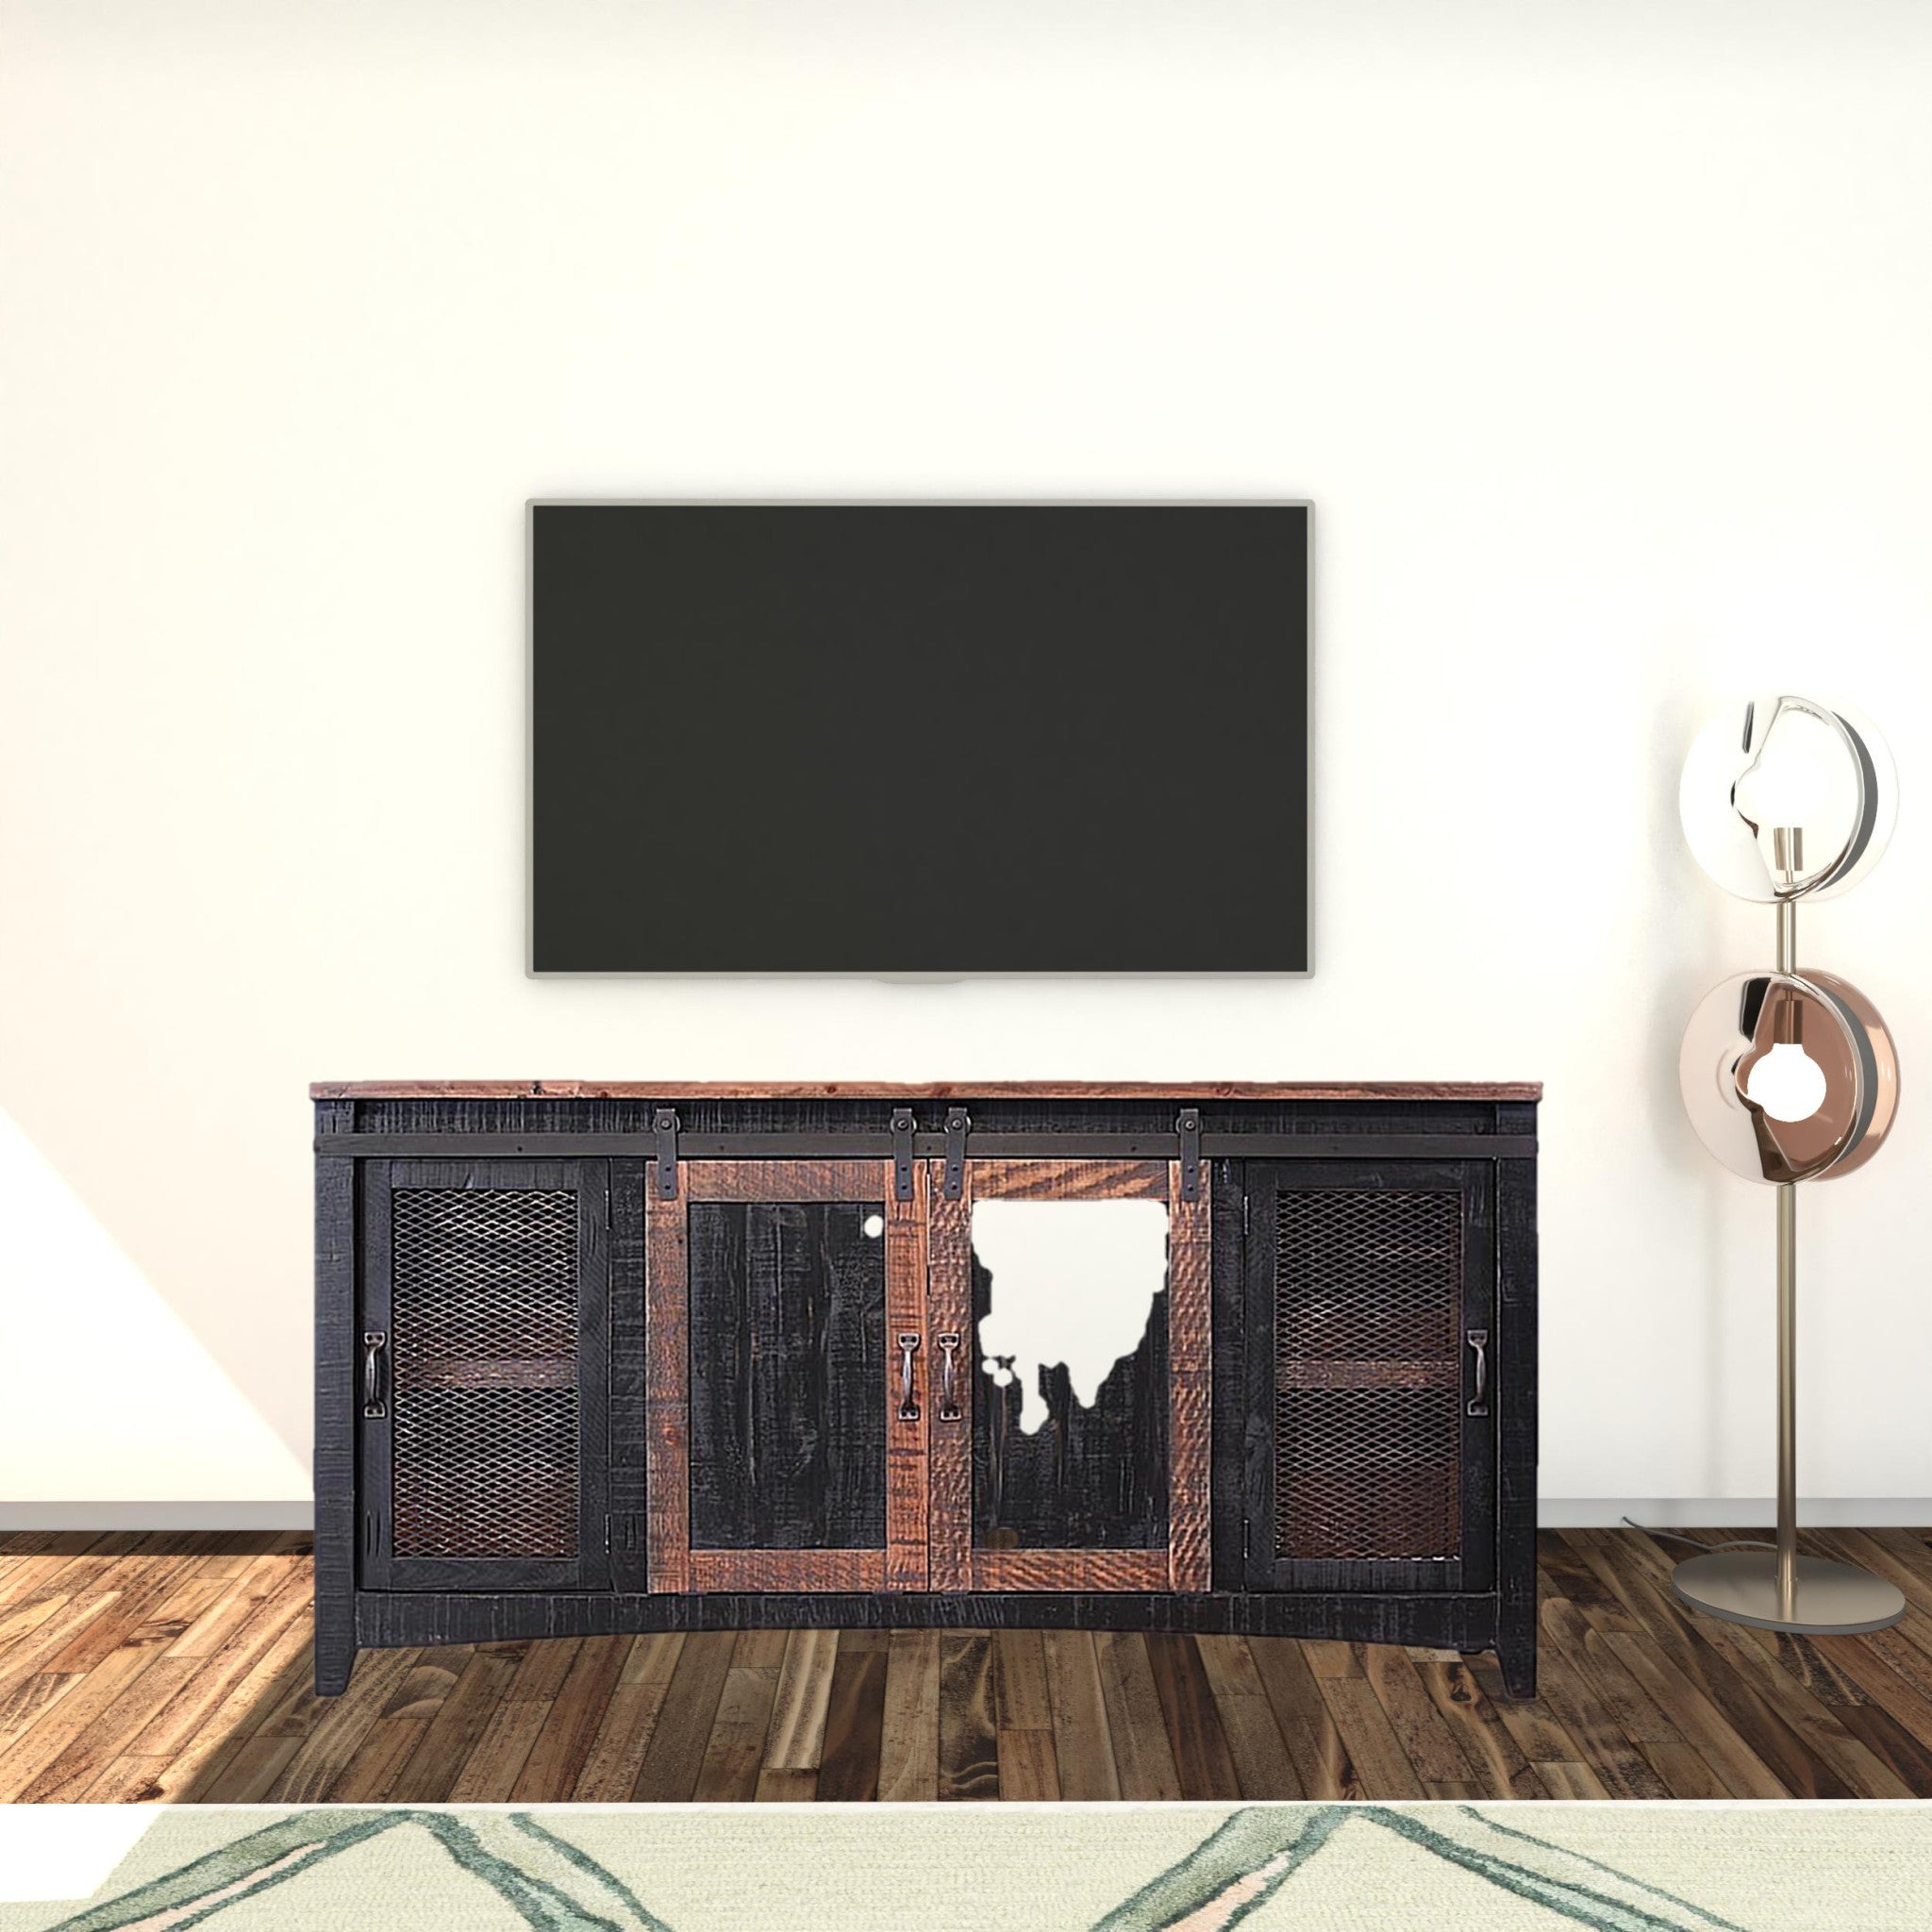 68" Black Solid Wood Cabinet Enclosed Storage Distressed TV Stand